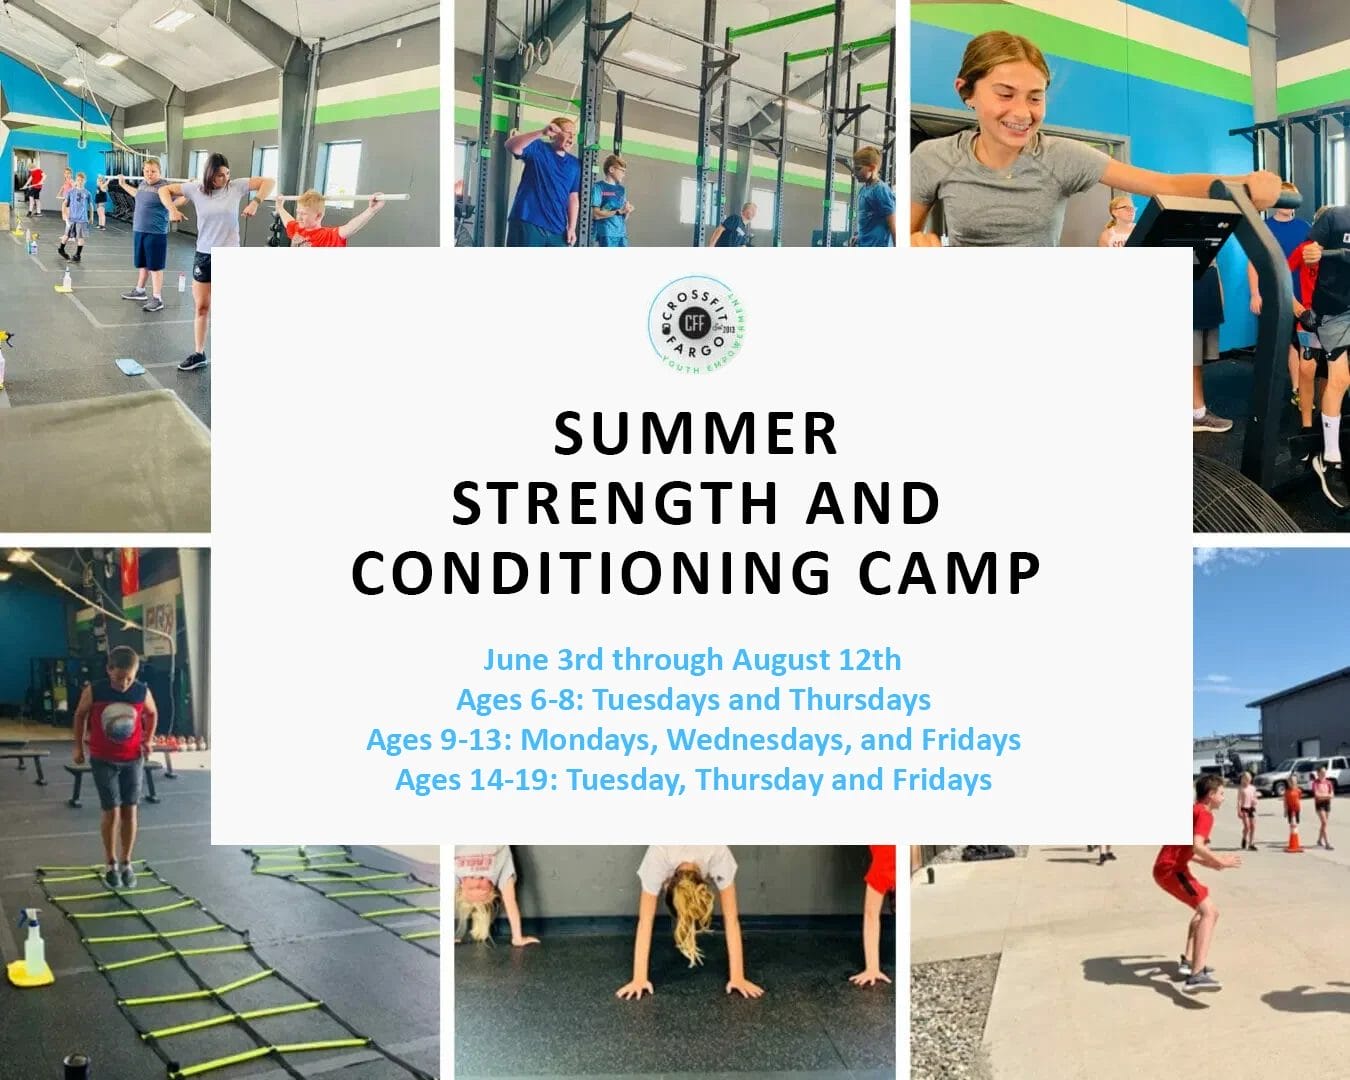 Summer strength and conditioning camp